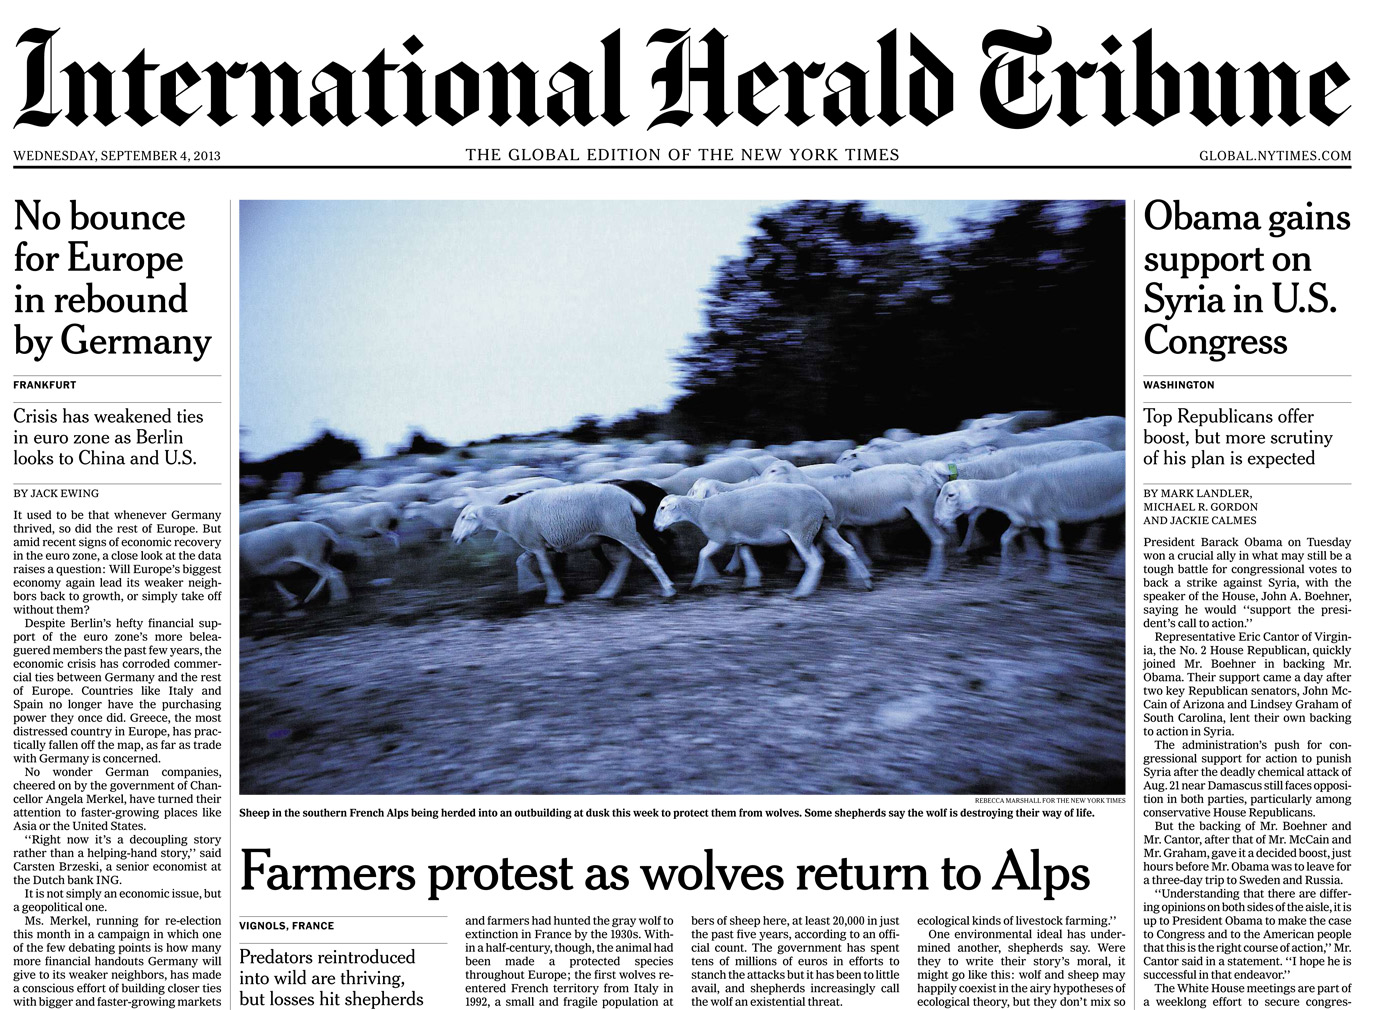 Front cover of the International Herald Tribune 04 Sep 2013 showing article and flock of sheep at dusk